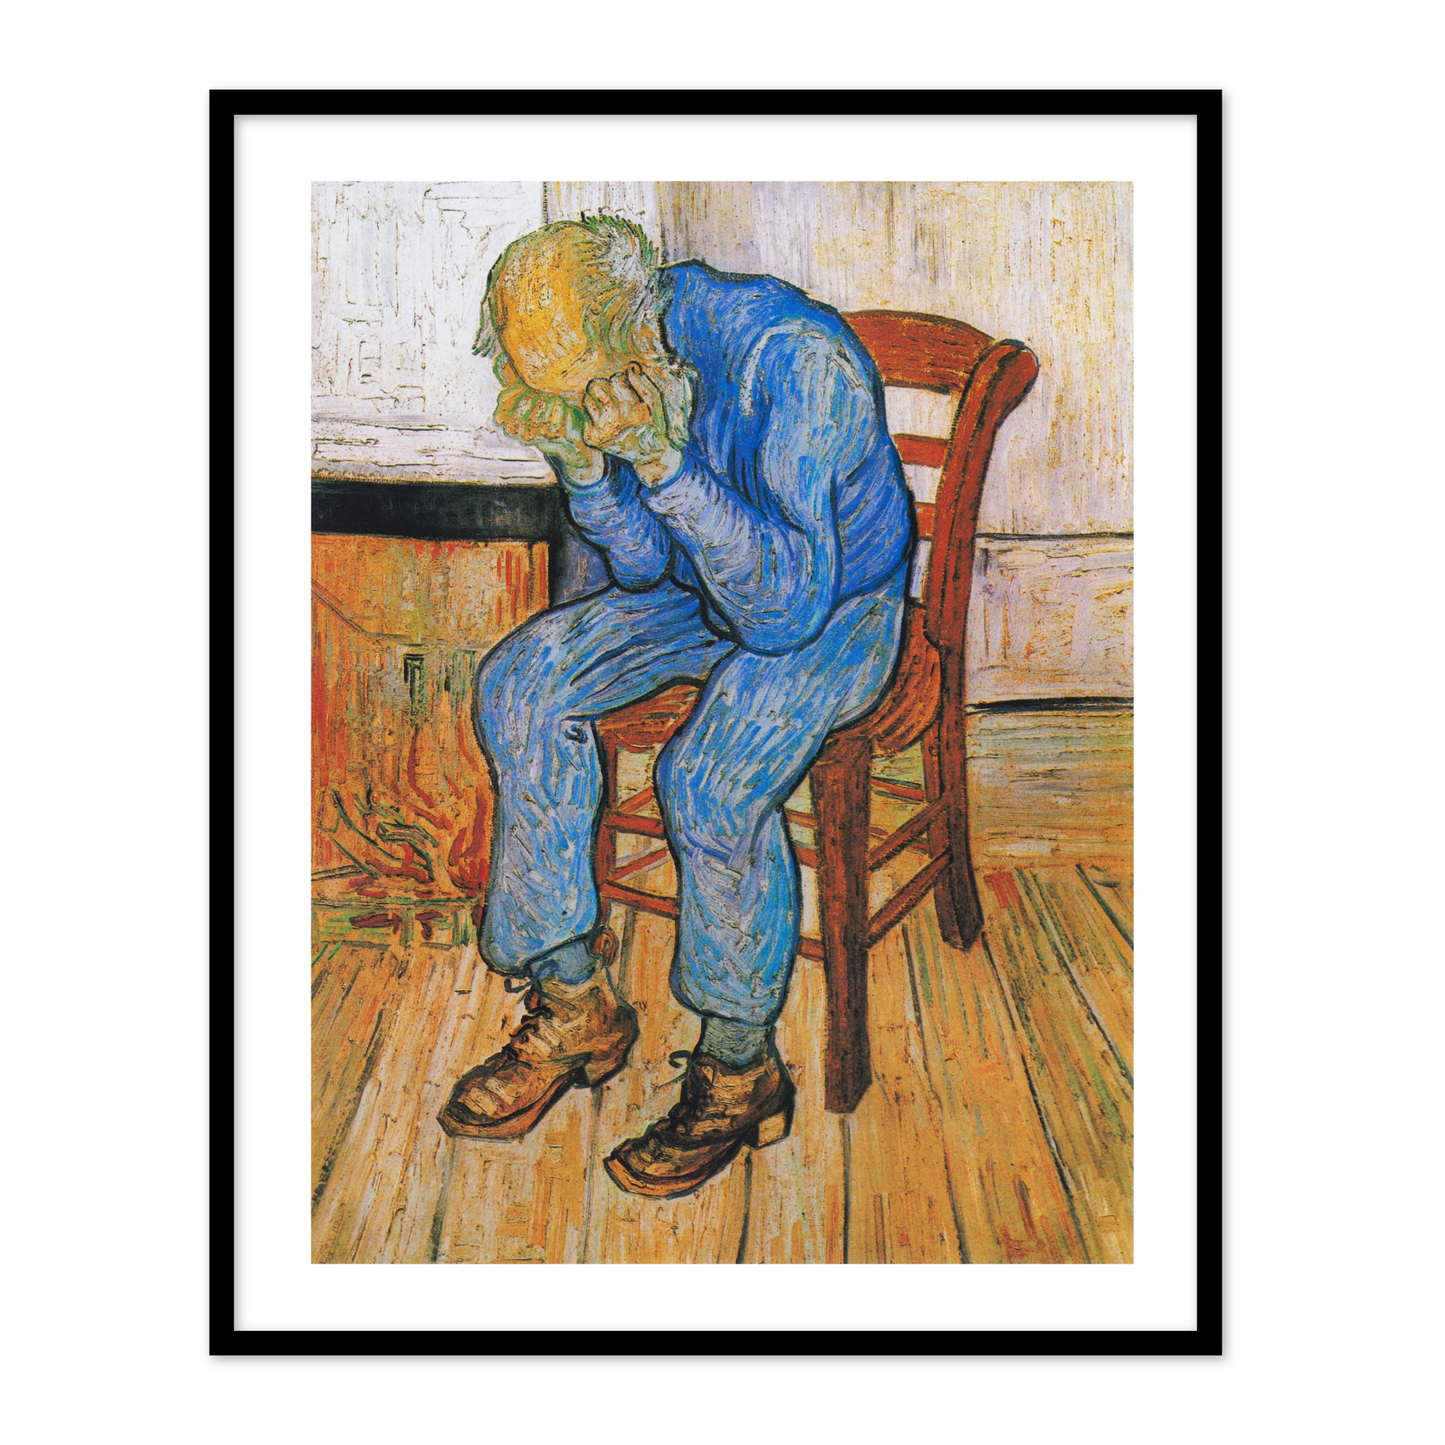 At Eternity's Gate by Vincent Van Gogh Famous Painting Wall Art